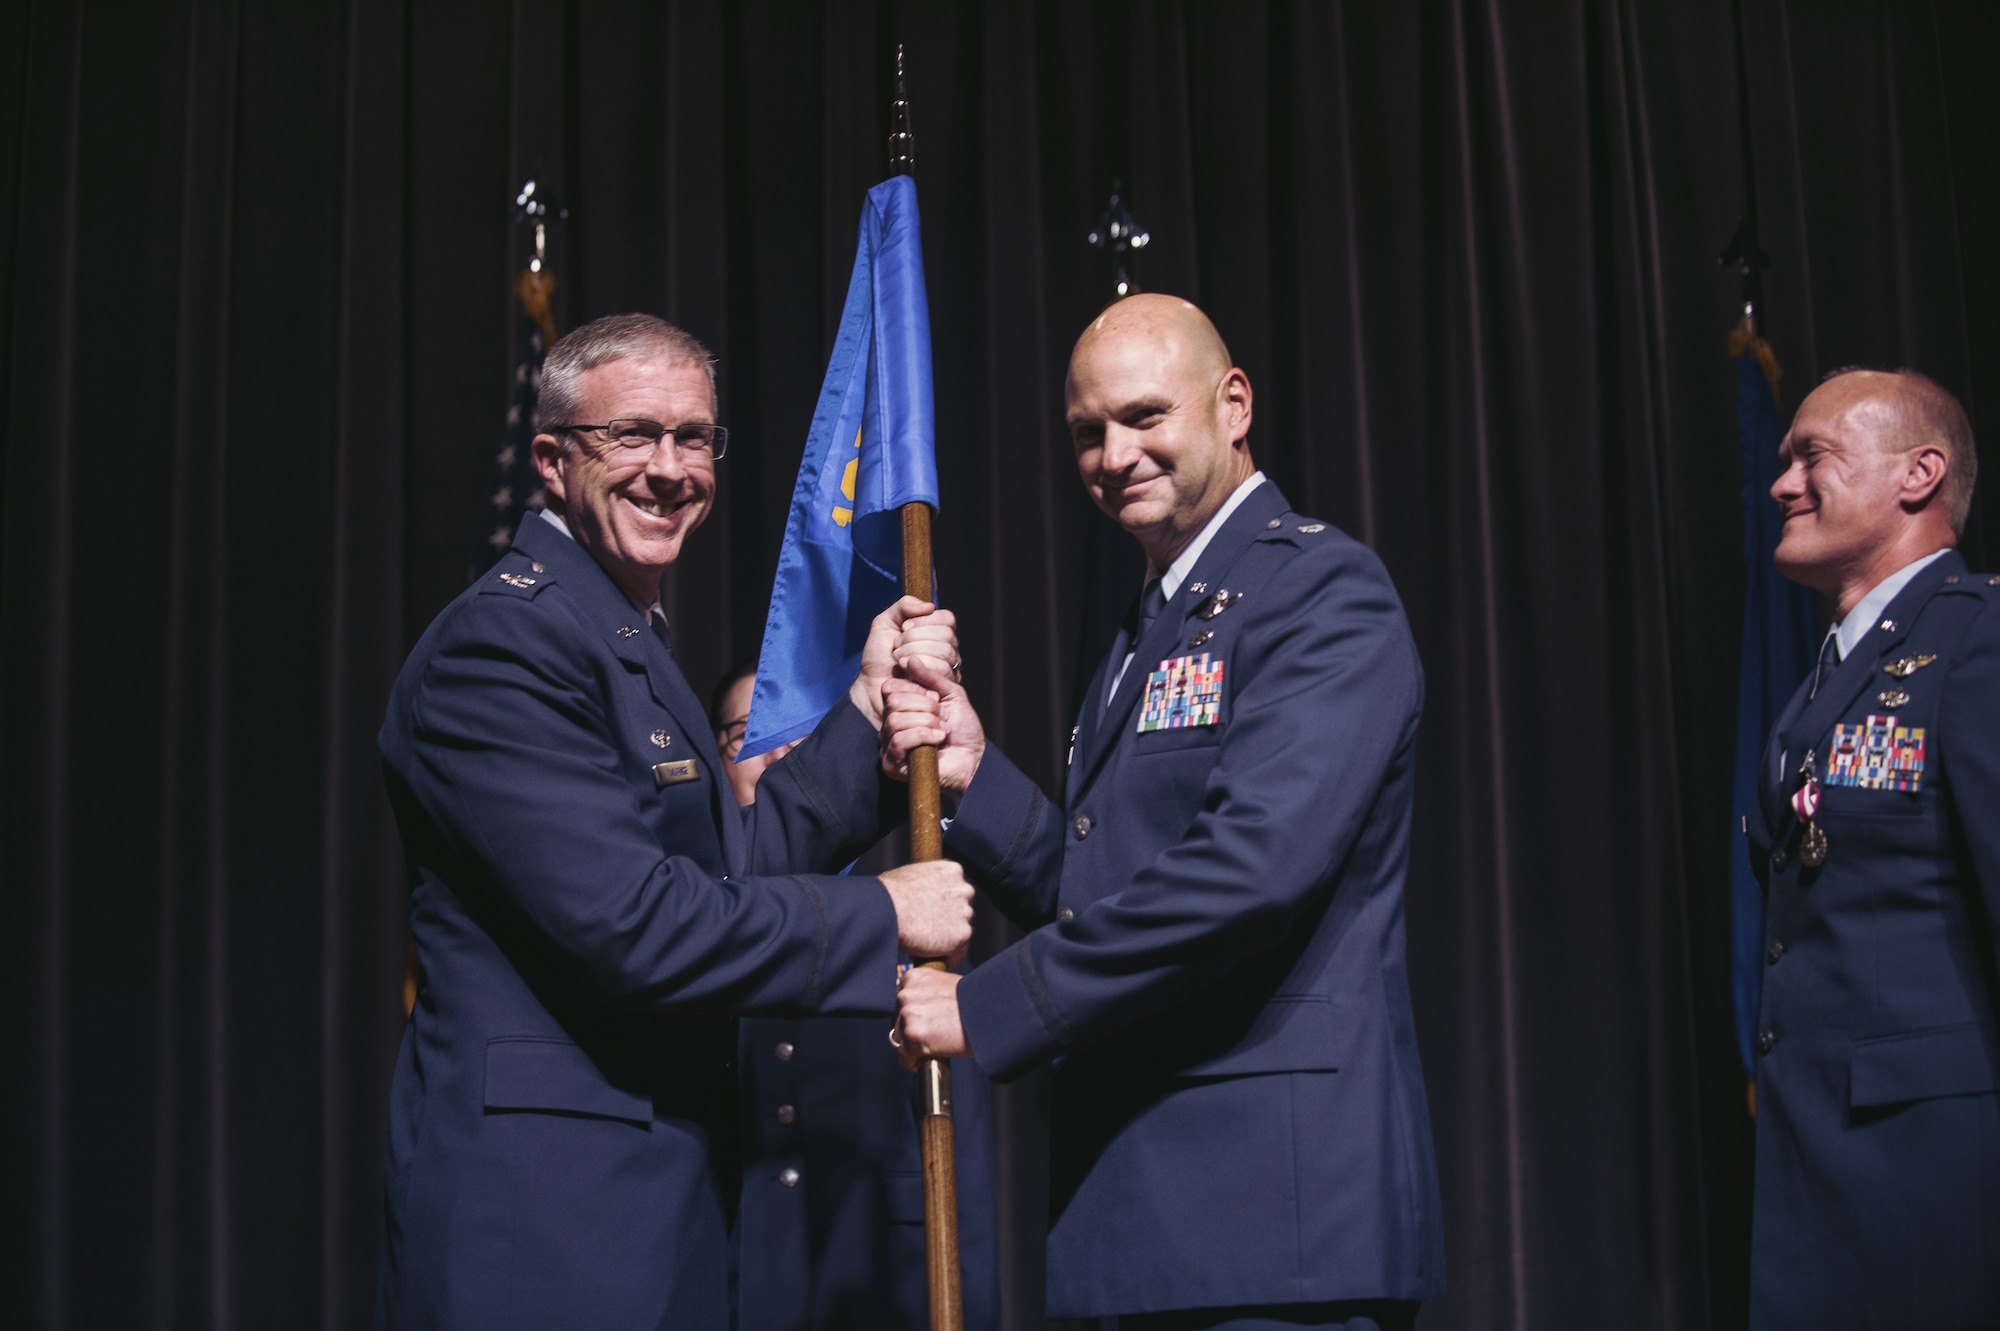 Col. Robert Kilgore, 107th Airlift Wing commander, Niagara Falls Air Reserve Station, N.Y., hands over the guidon of the 107th Operations Squadron here to Lt. Col. Douglas Euote during a ceremony marking the change of command for the squadron, Sept. 27, 2016. Euote takes command of the 107th OS from Lt. Col. Gary Charlton who was selected to be vice commander of the 107th AW. (Air National Guard photo by Staff Sgt. Ryan Campbell)